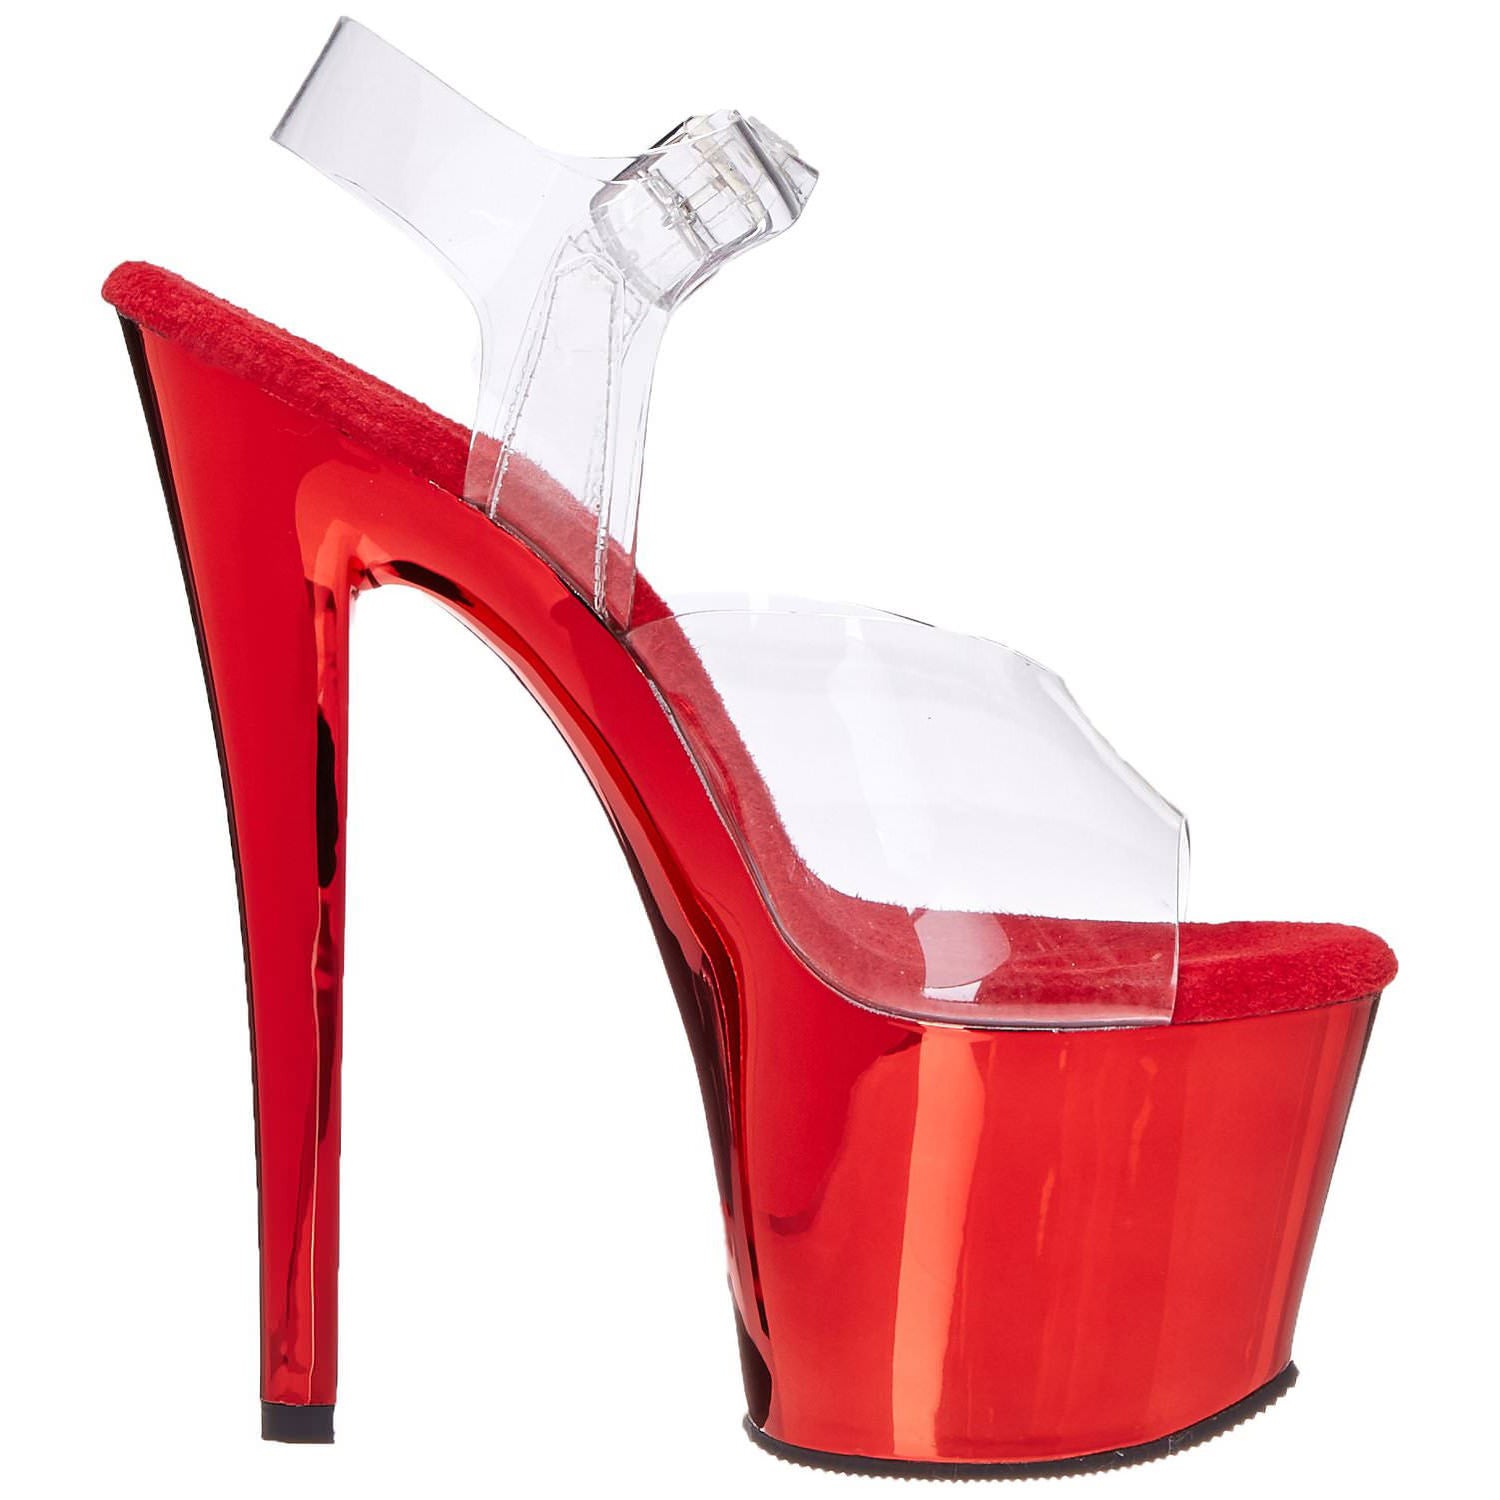 PLEASER SKY-308 Clear-Red Chrome Ankle Strap Sandals - Shoecup.com - 6